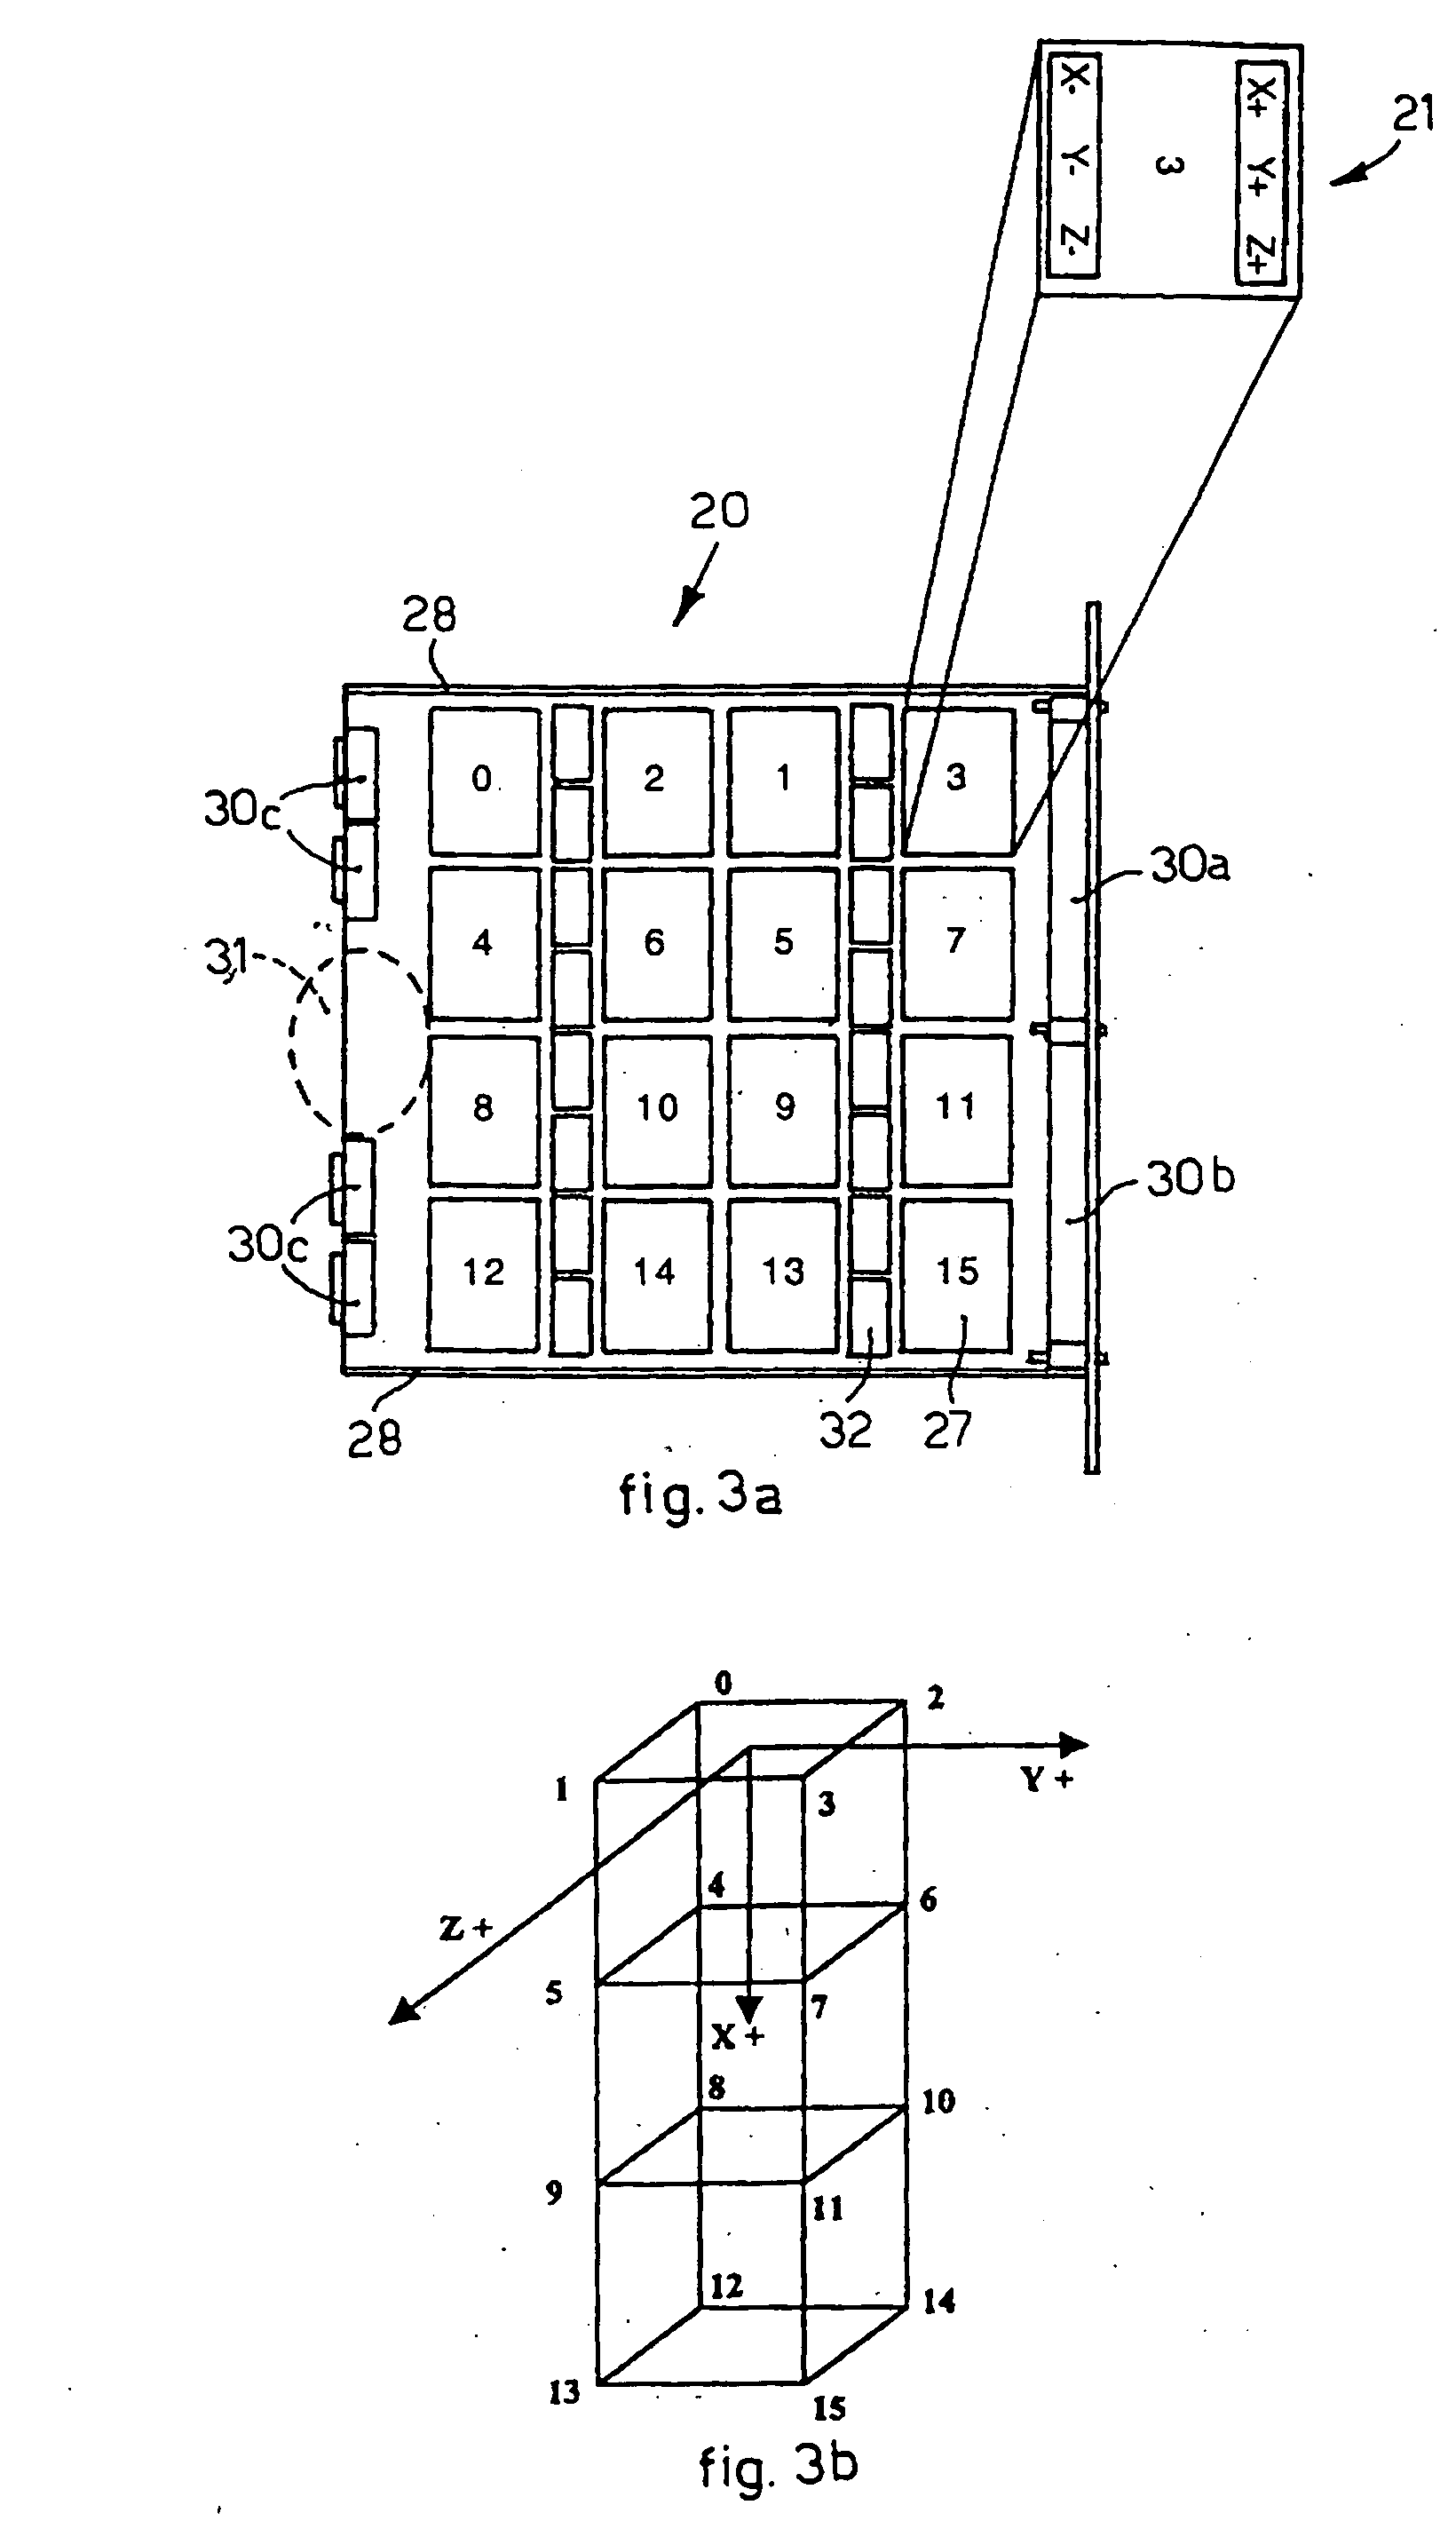 Modular electronic card for a communication network